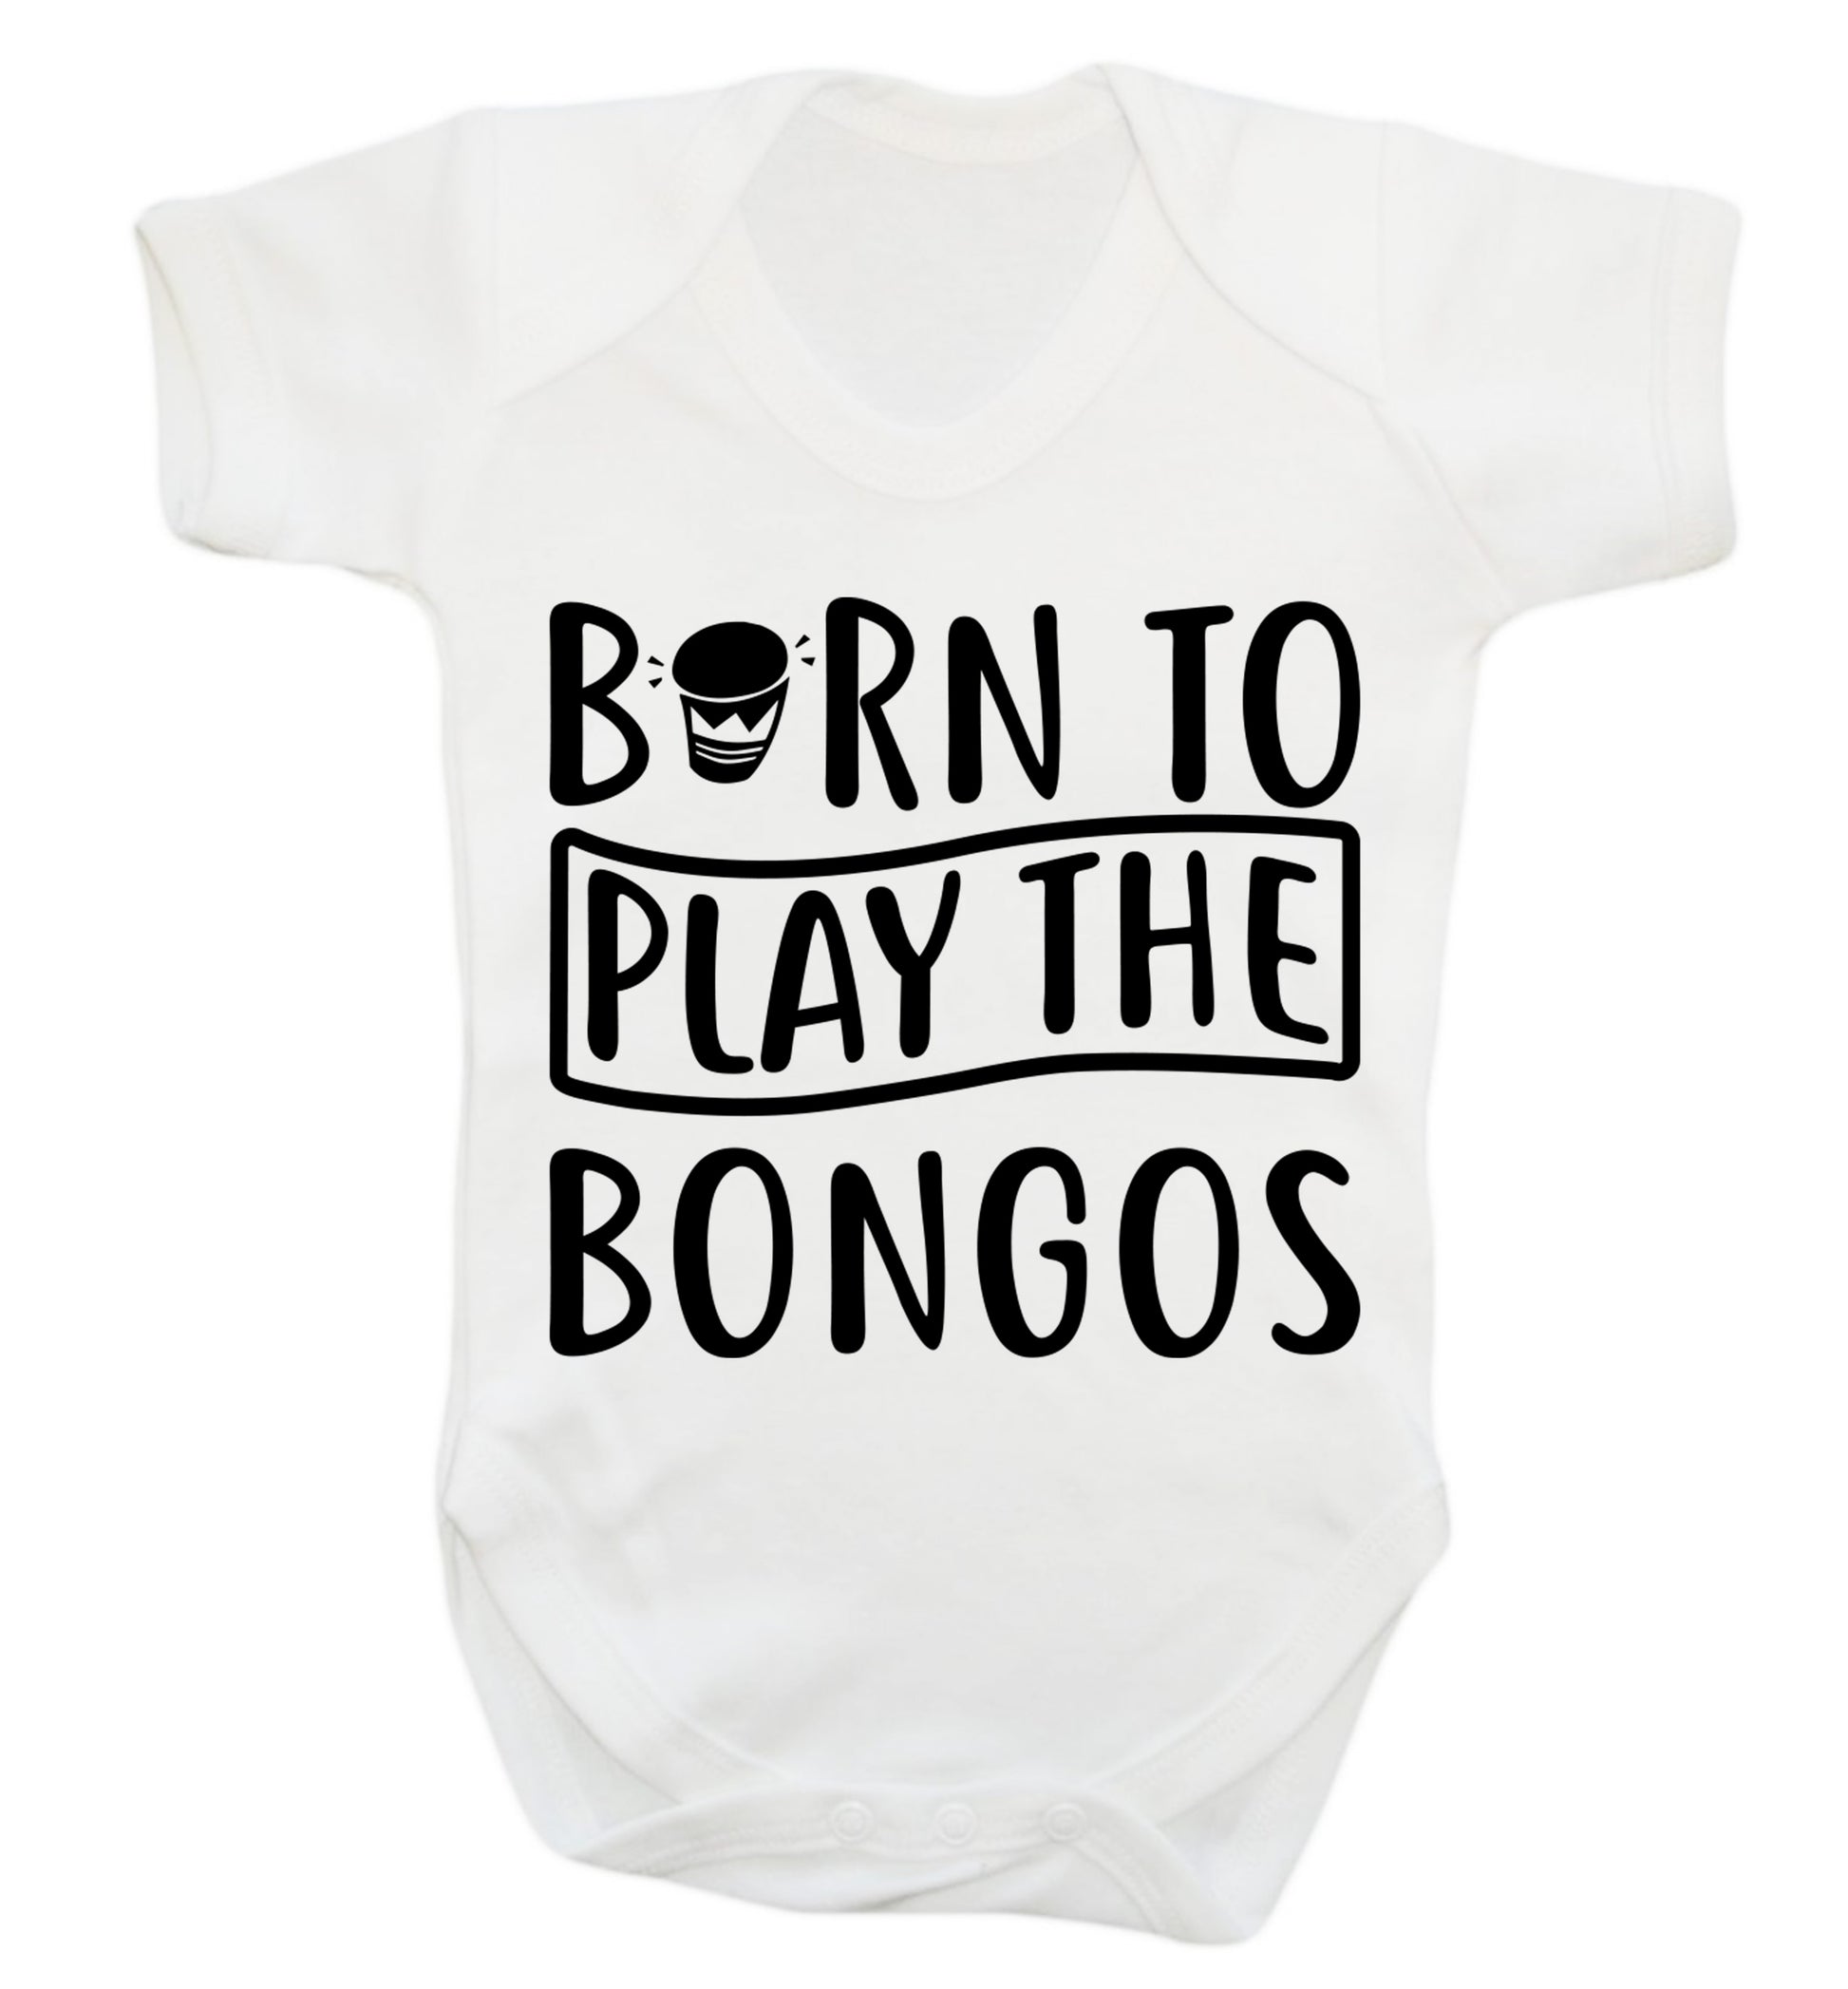 Born to play the bongos Baby Vest white 18-24 months